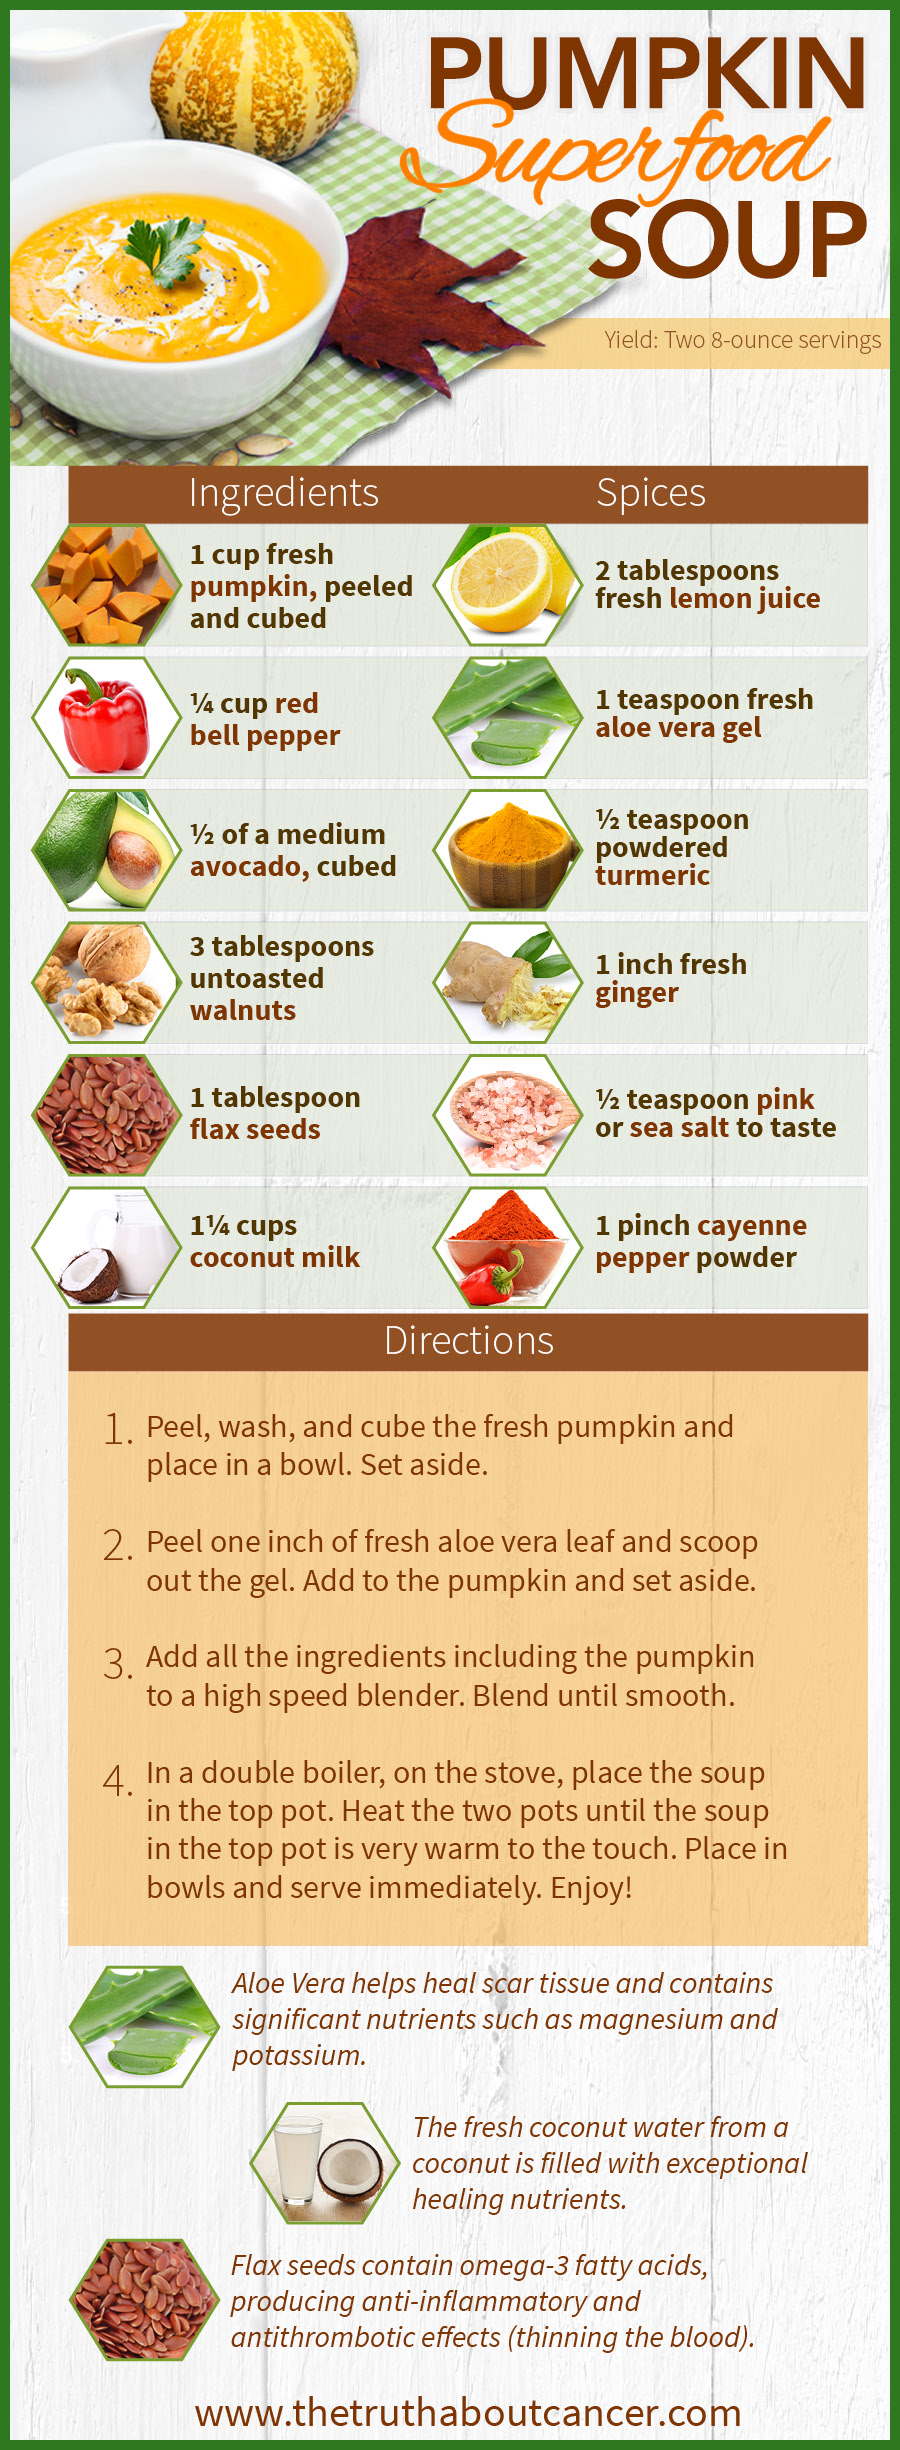 Pumpking Superfood Soup Recipe to Alleviate Dysphagia